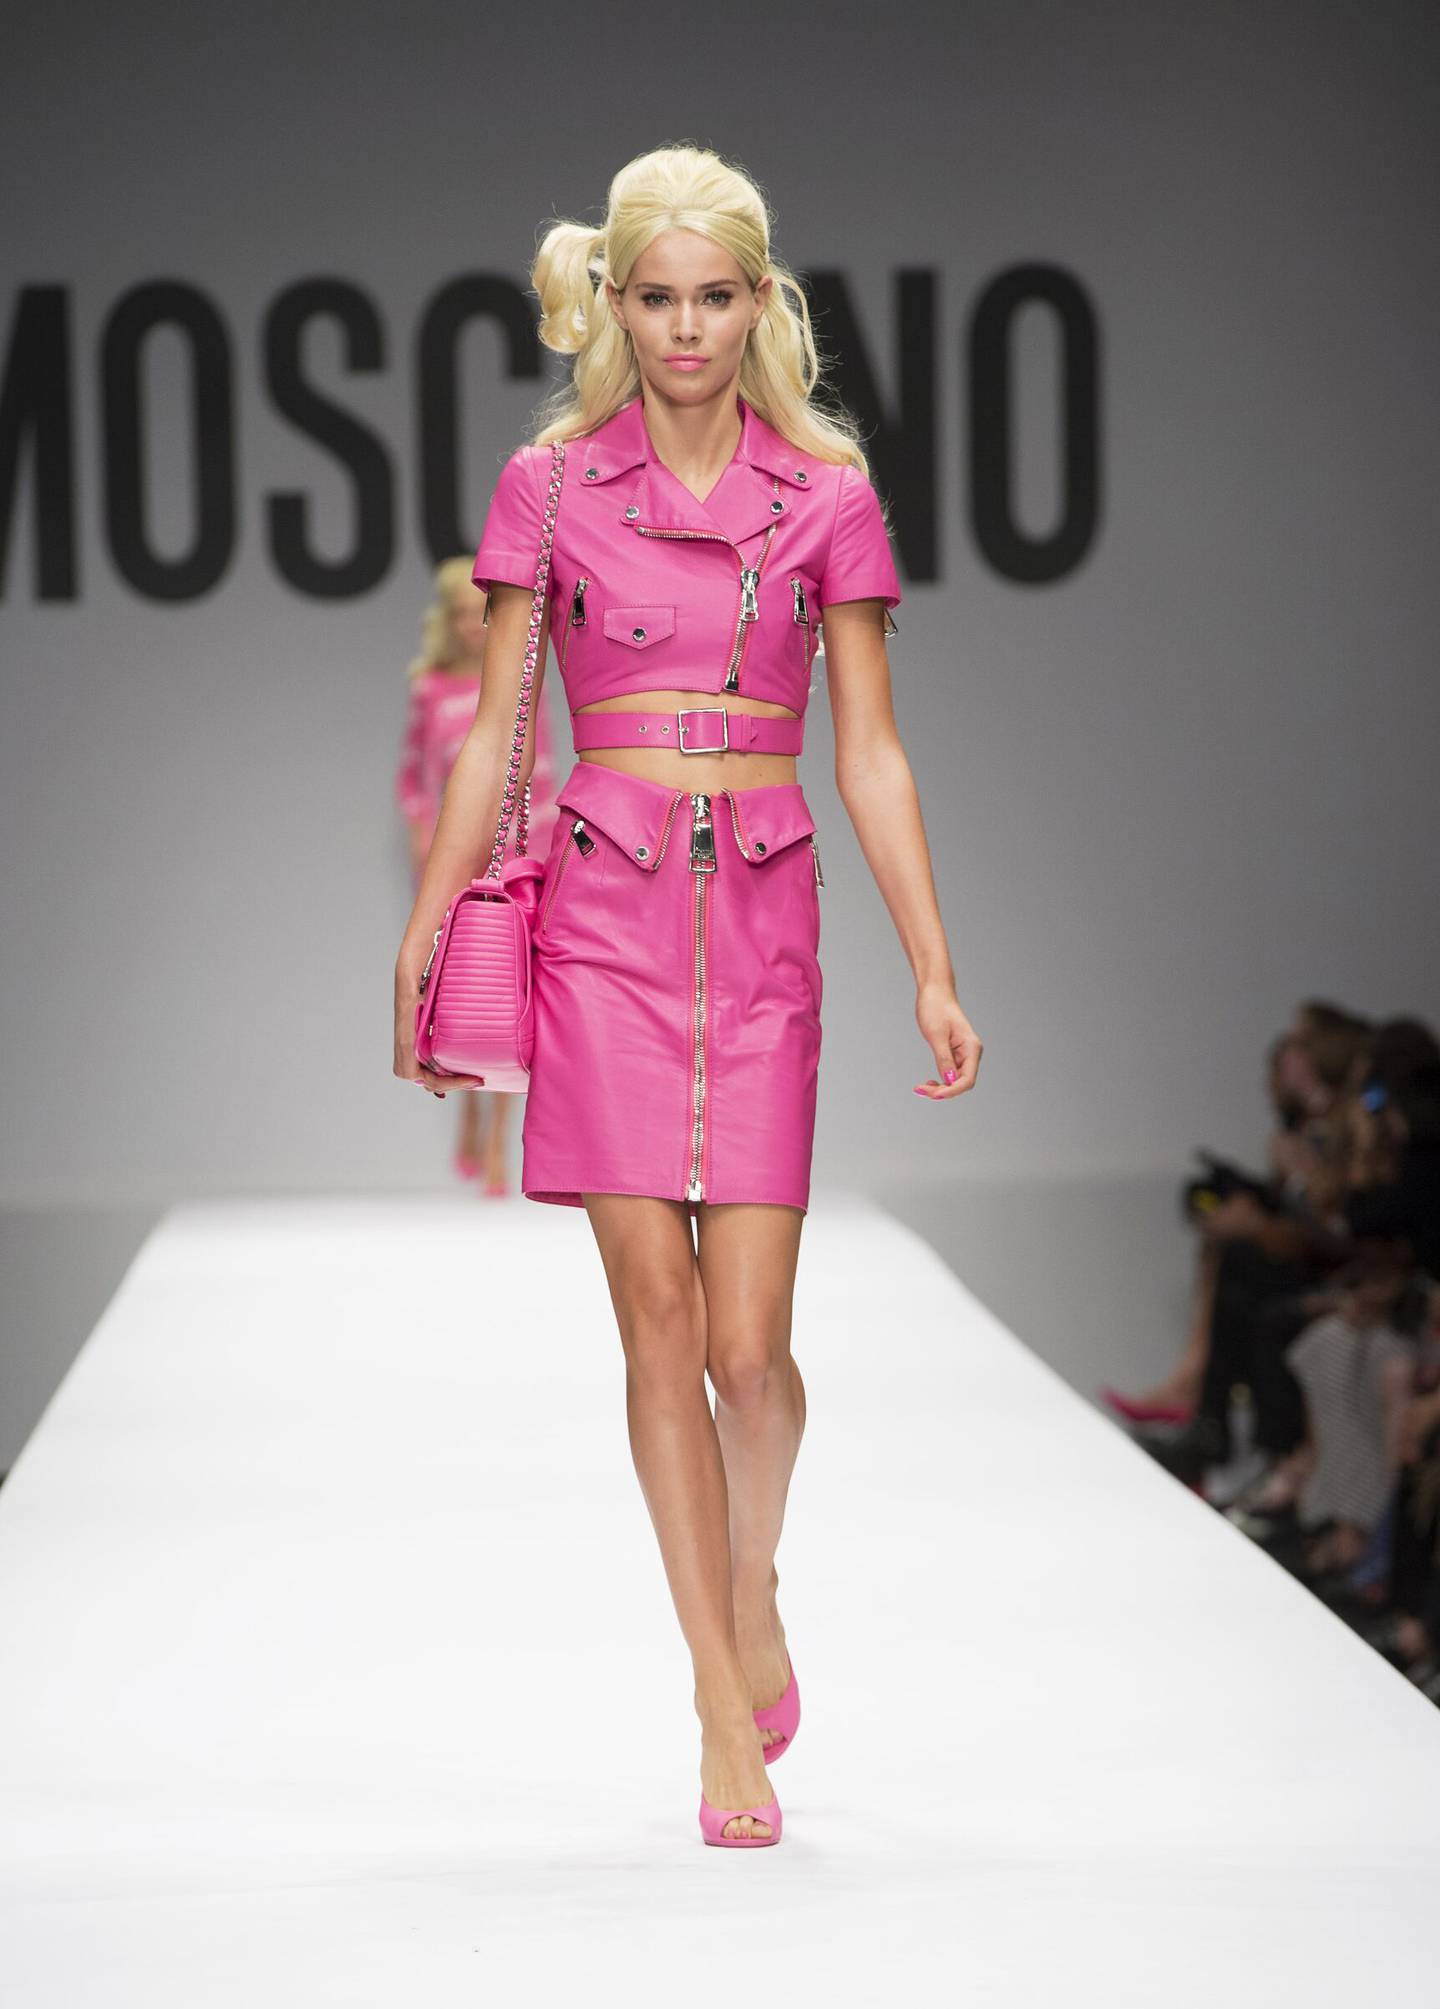 The spring/summer 2015 Moschino collection was inspired by Barbie, and created as her dream wardrobe. Photo: Moschino